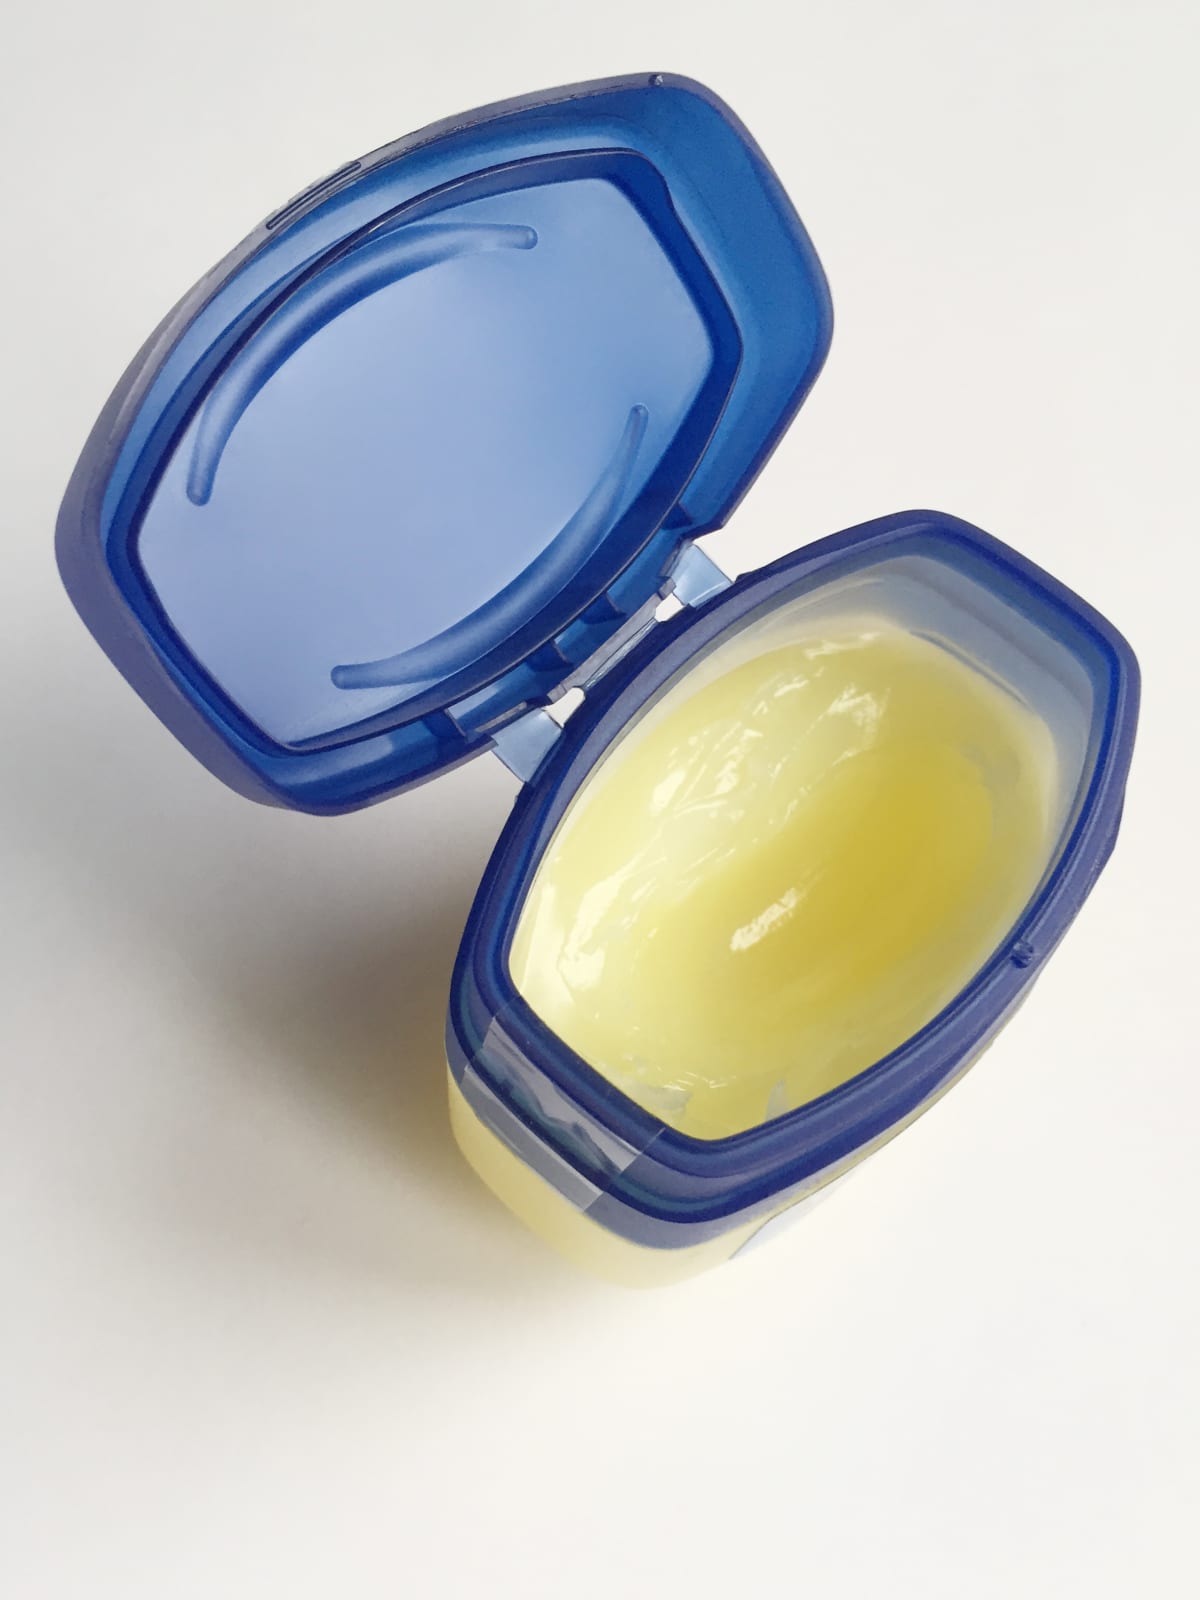 High-angle view of an open Vaseline jar on white background